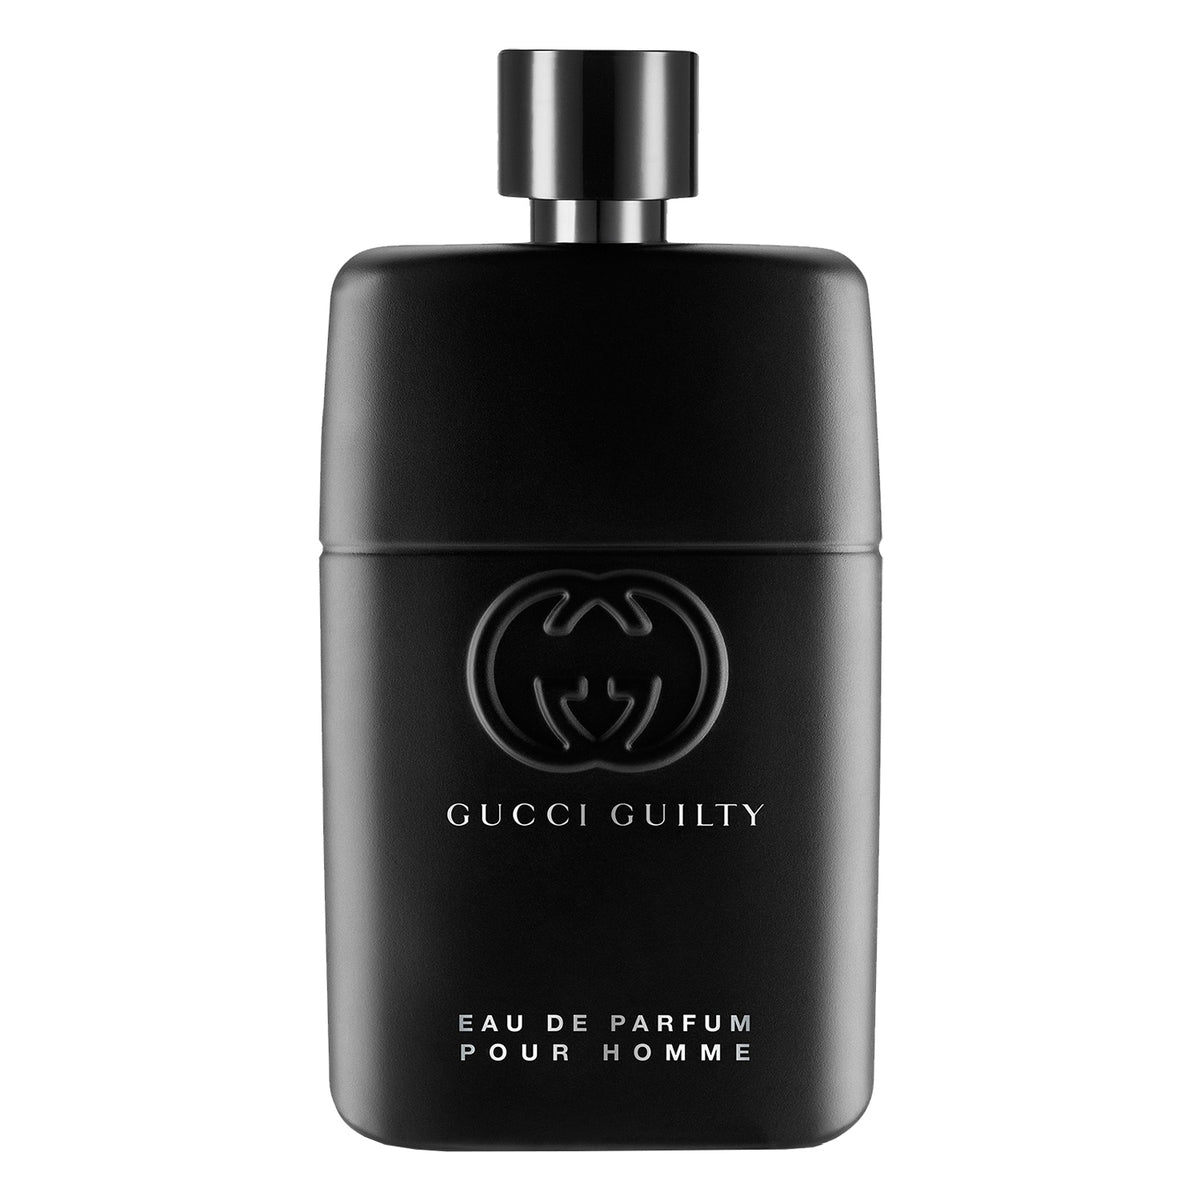 Guilty Pour Homme by Gucci Fragrance Samples, DecantX